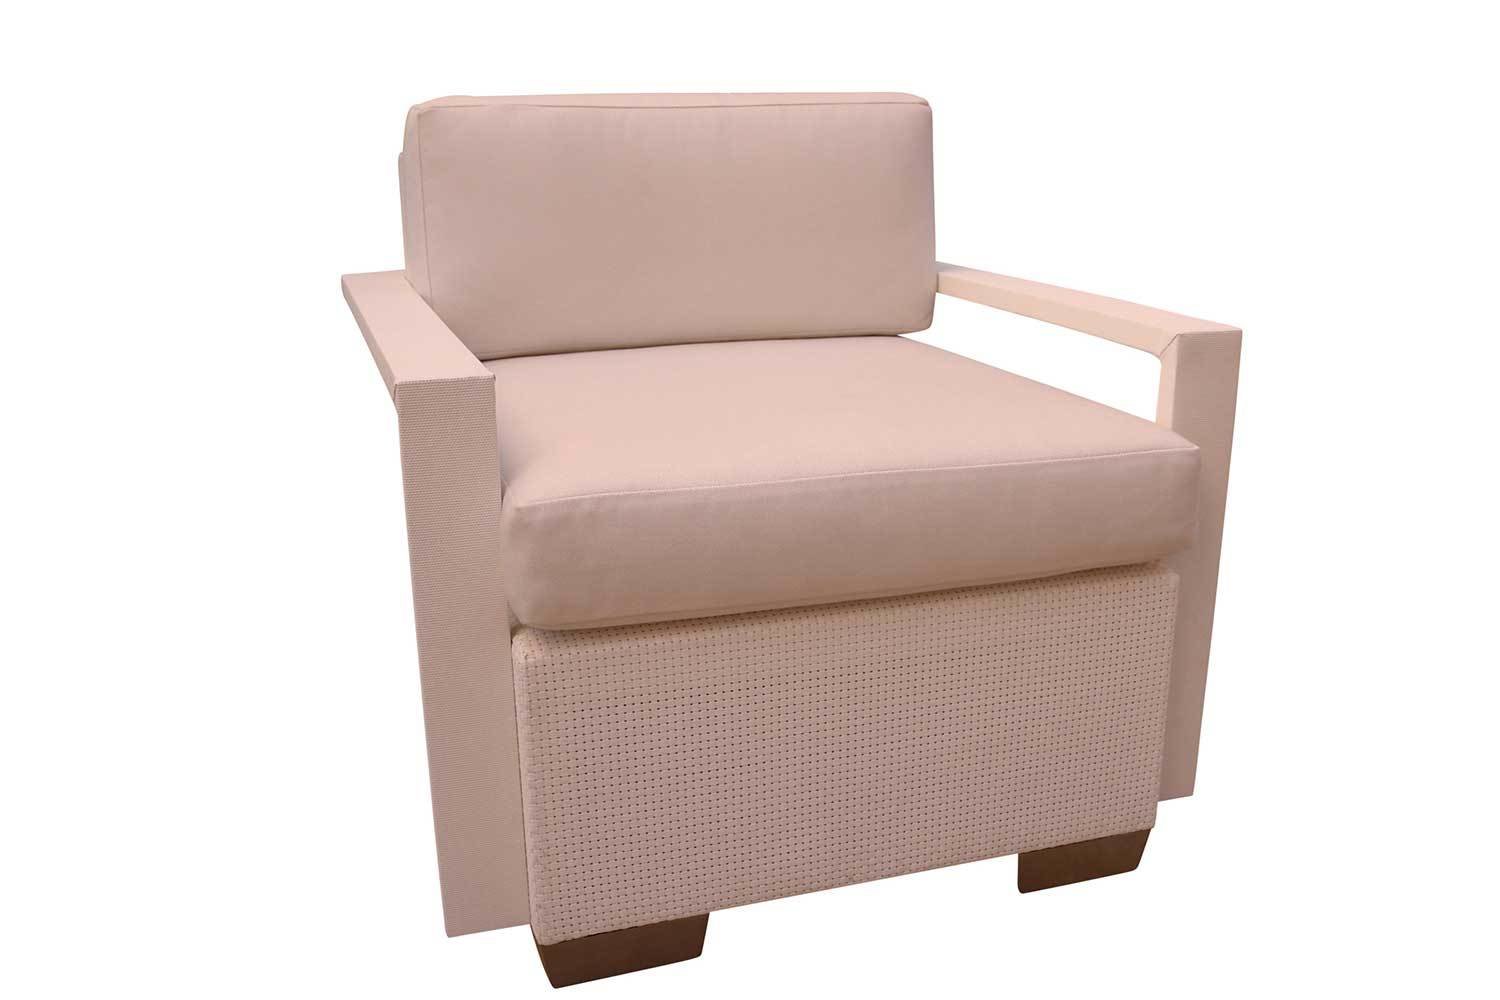 Chair with White Arms